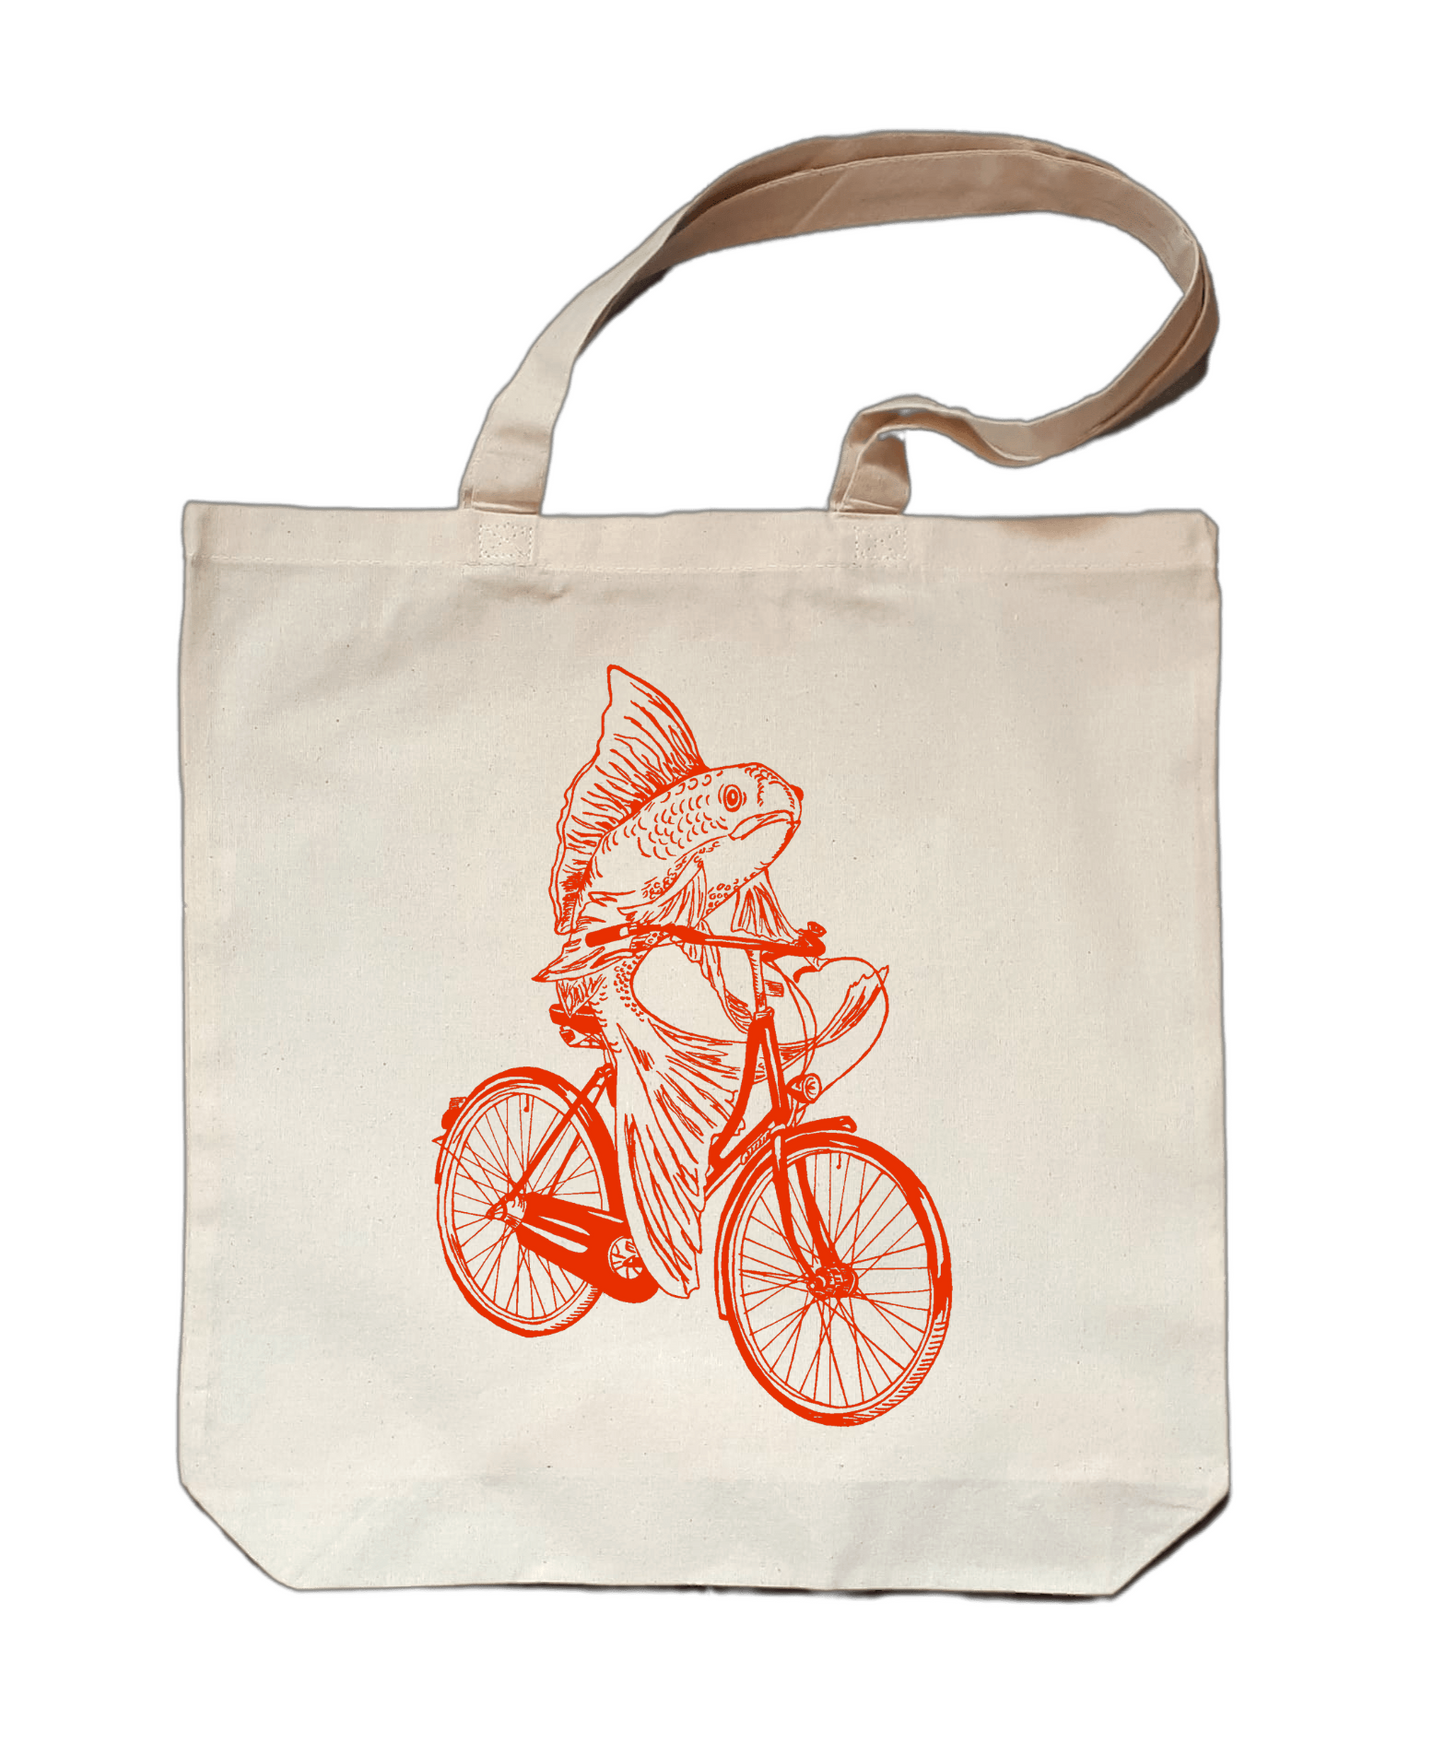 Fish on a Bicycle Small Cotton Tote